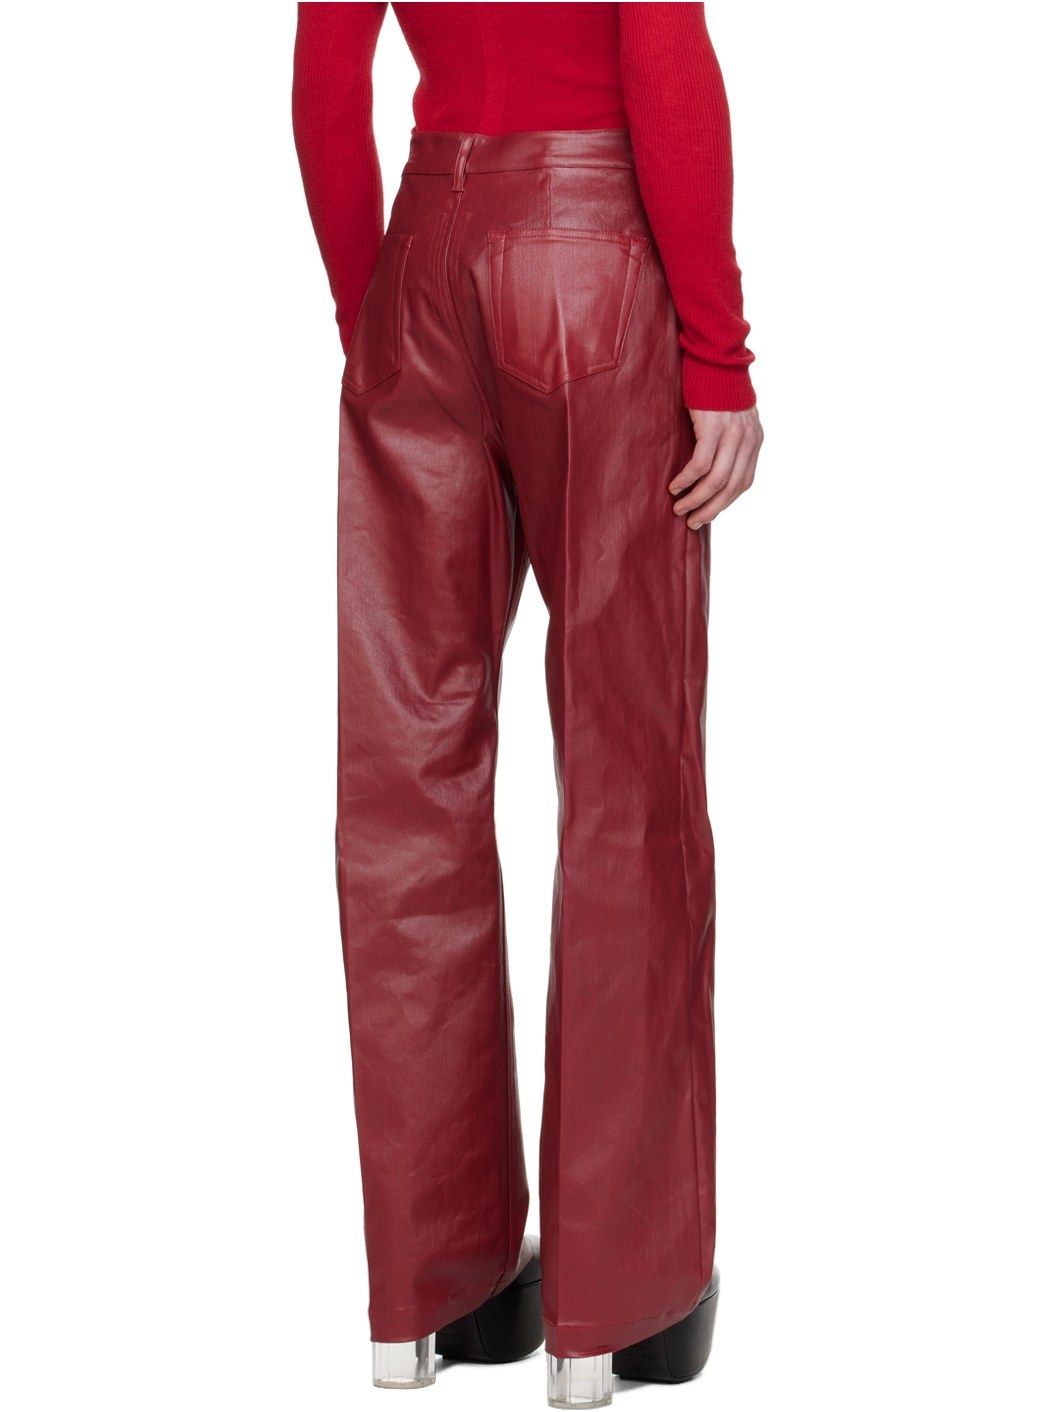 Red Geth Jeans - 3